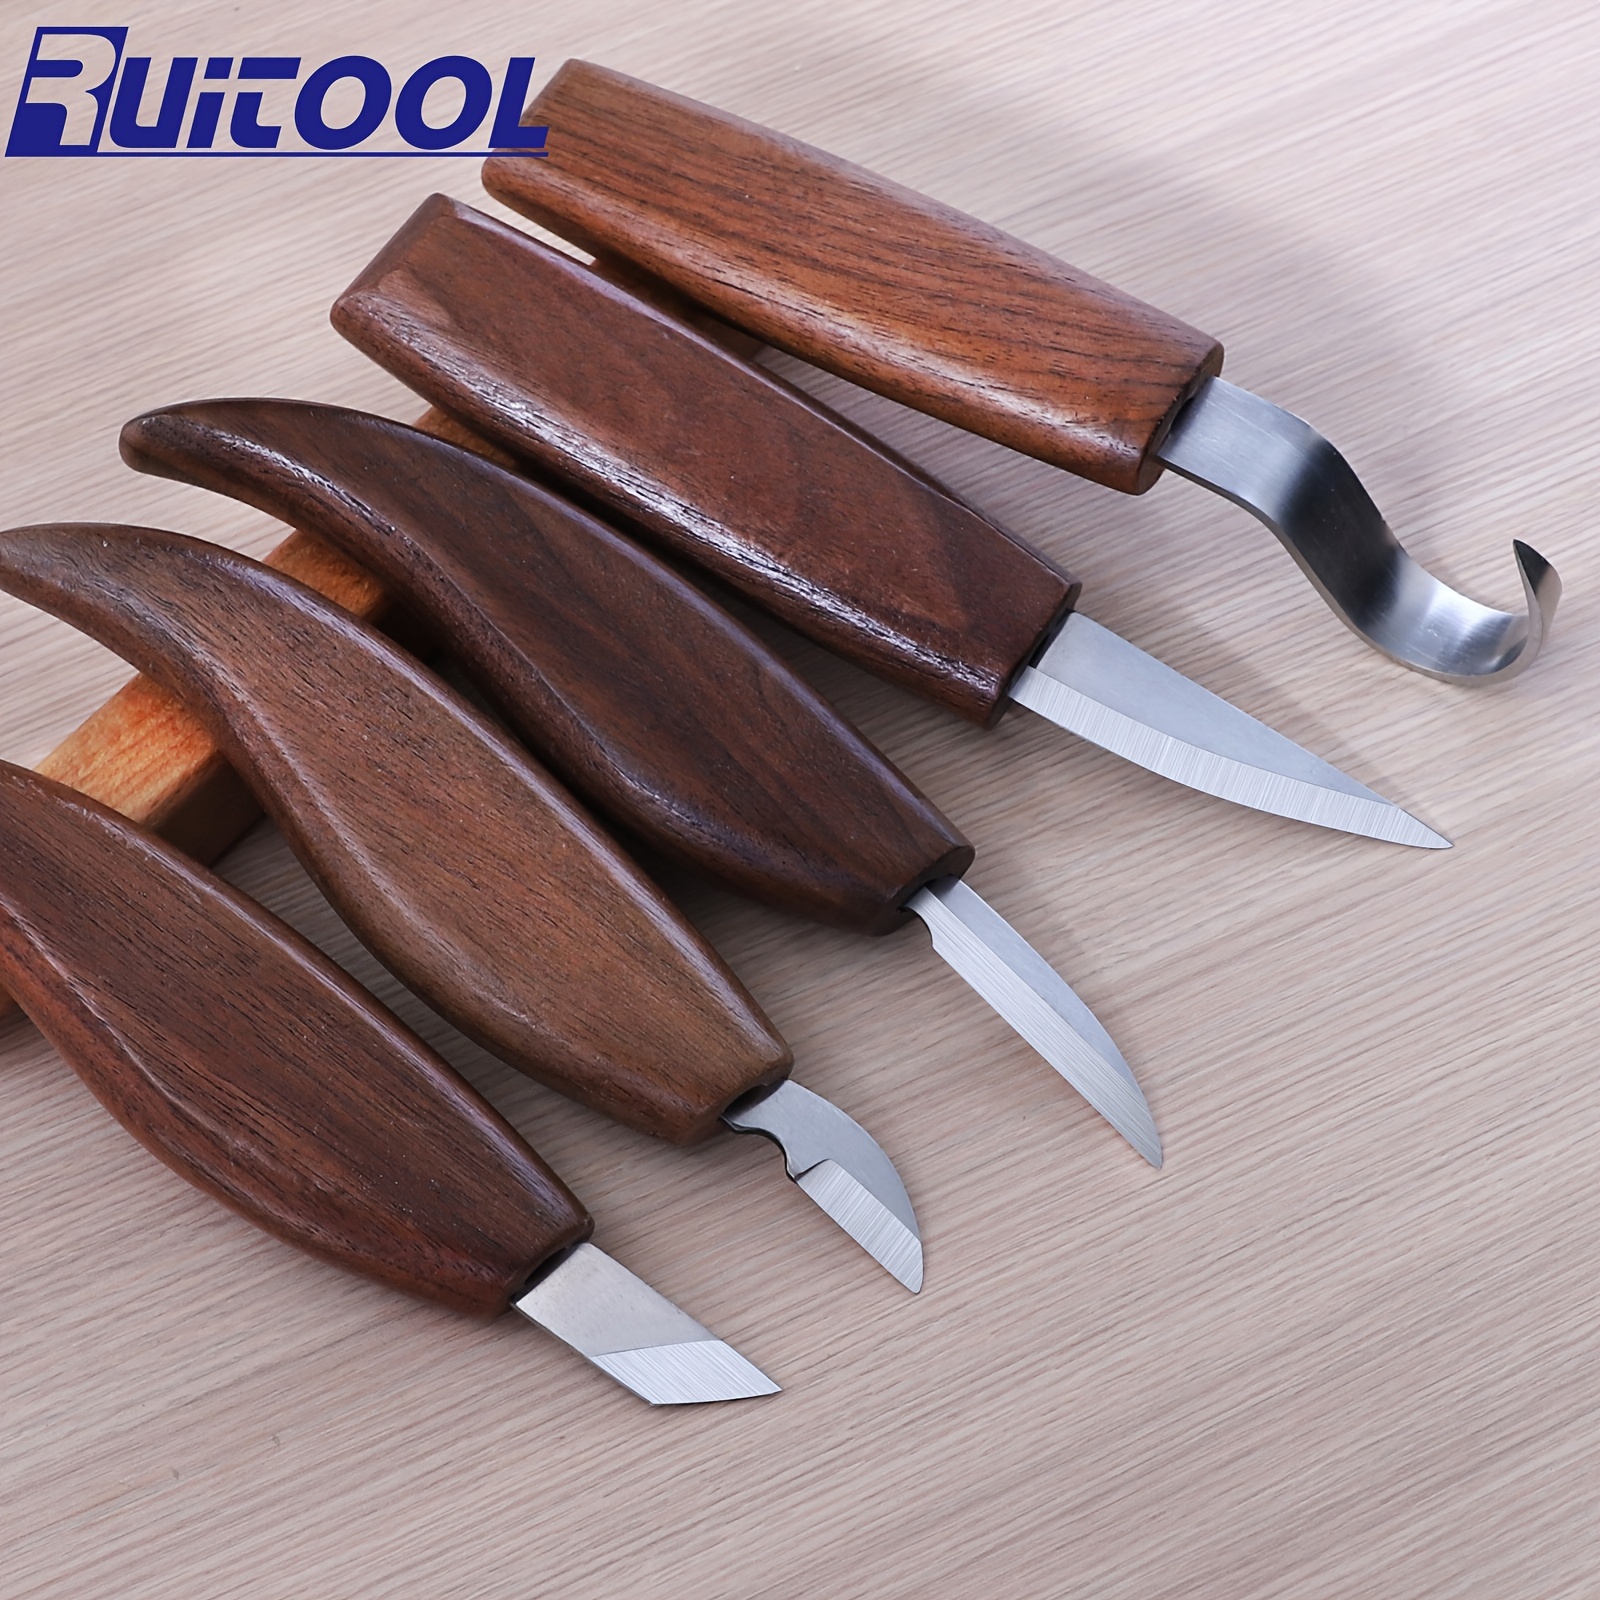 Carving Wood Knife, Wood Carving Tools, Woodworking Cutter